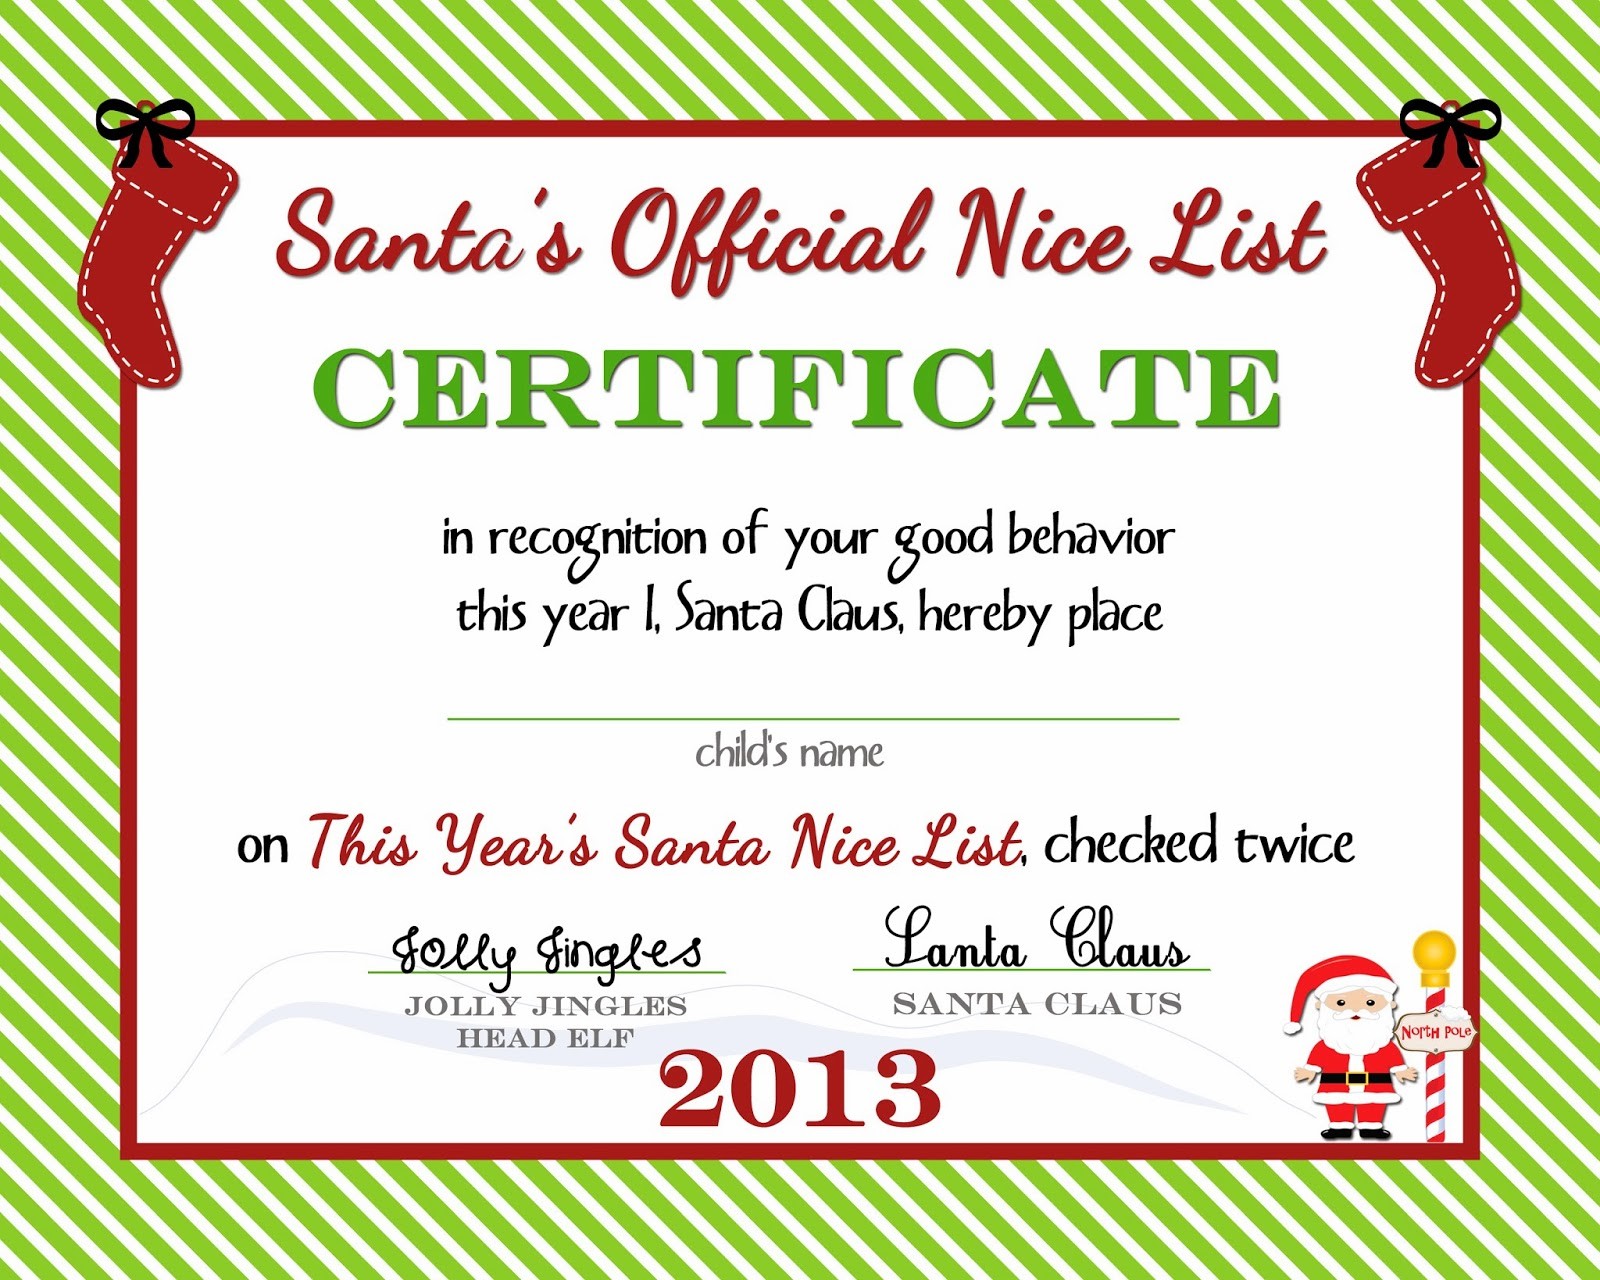 Free Printable Nice List Certificate From The North Pole A Christmas